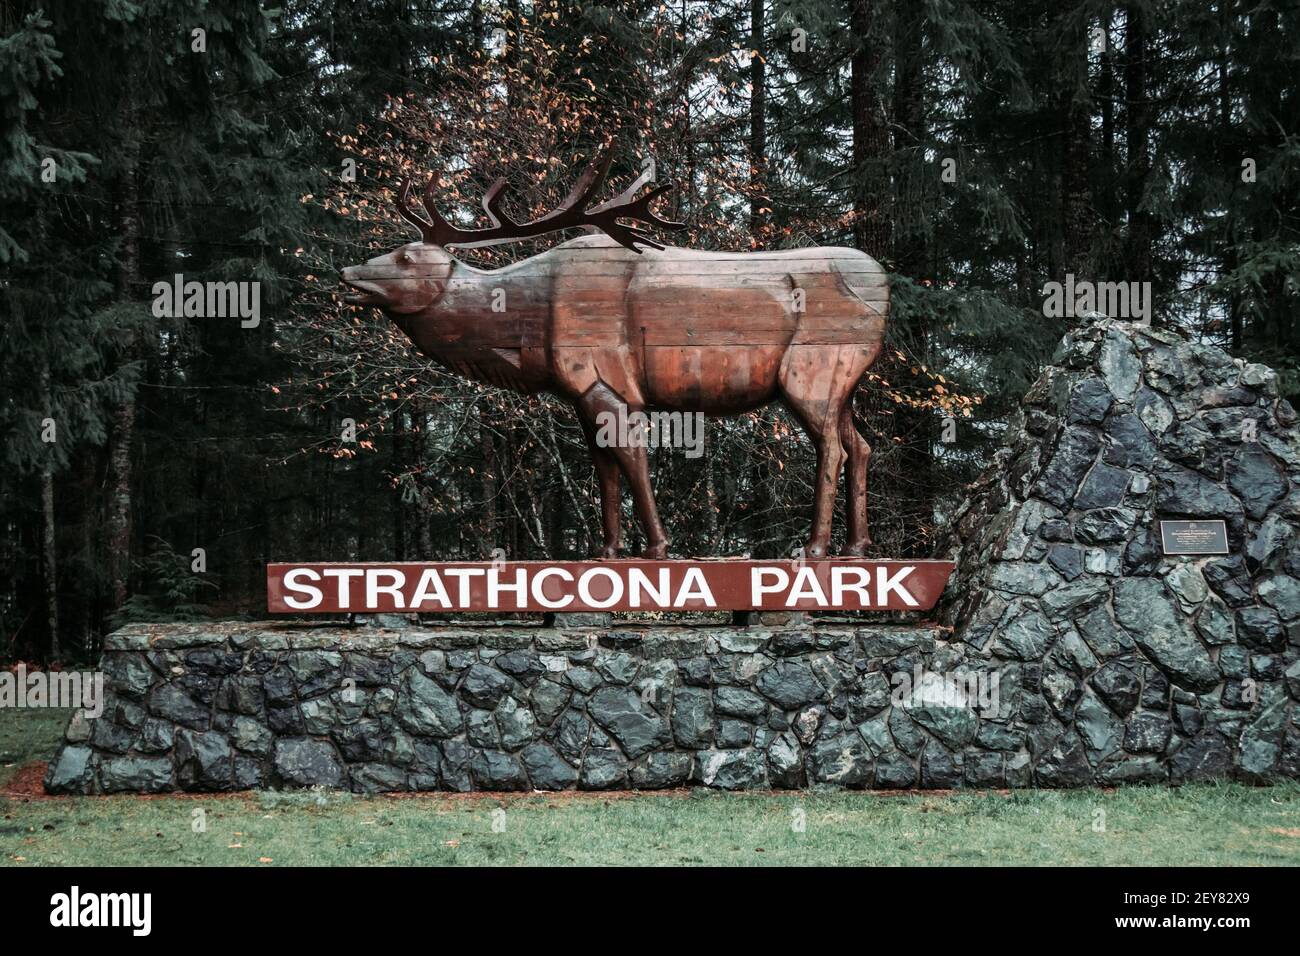 Vancouver Island, Canada - November 17,2020: View of welcome sign Strathcona Park with forest in the background Stock Photo